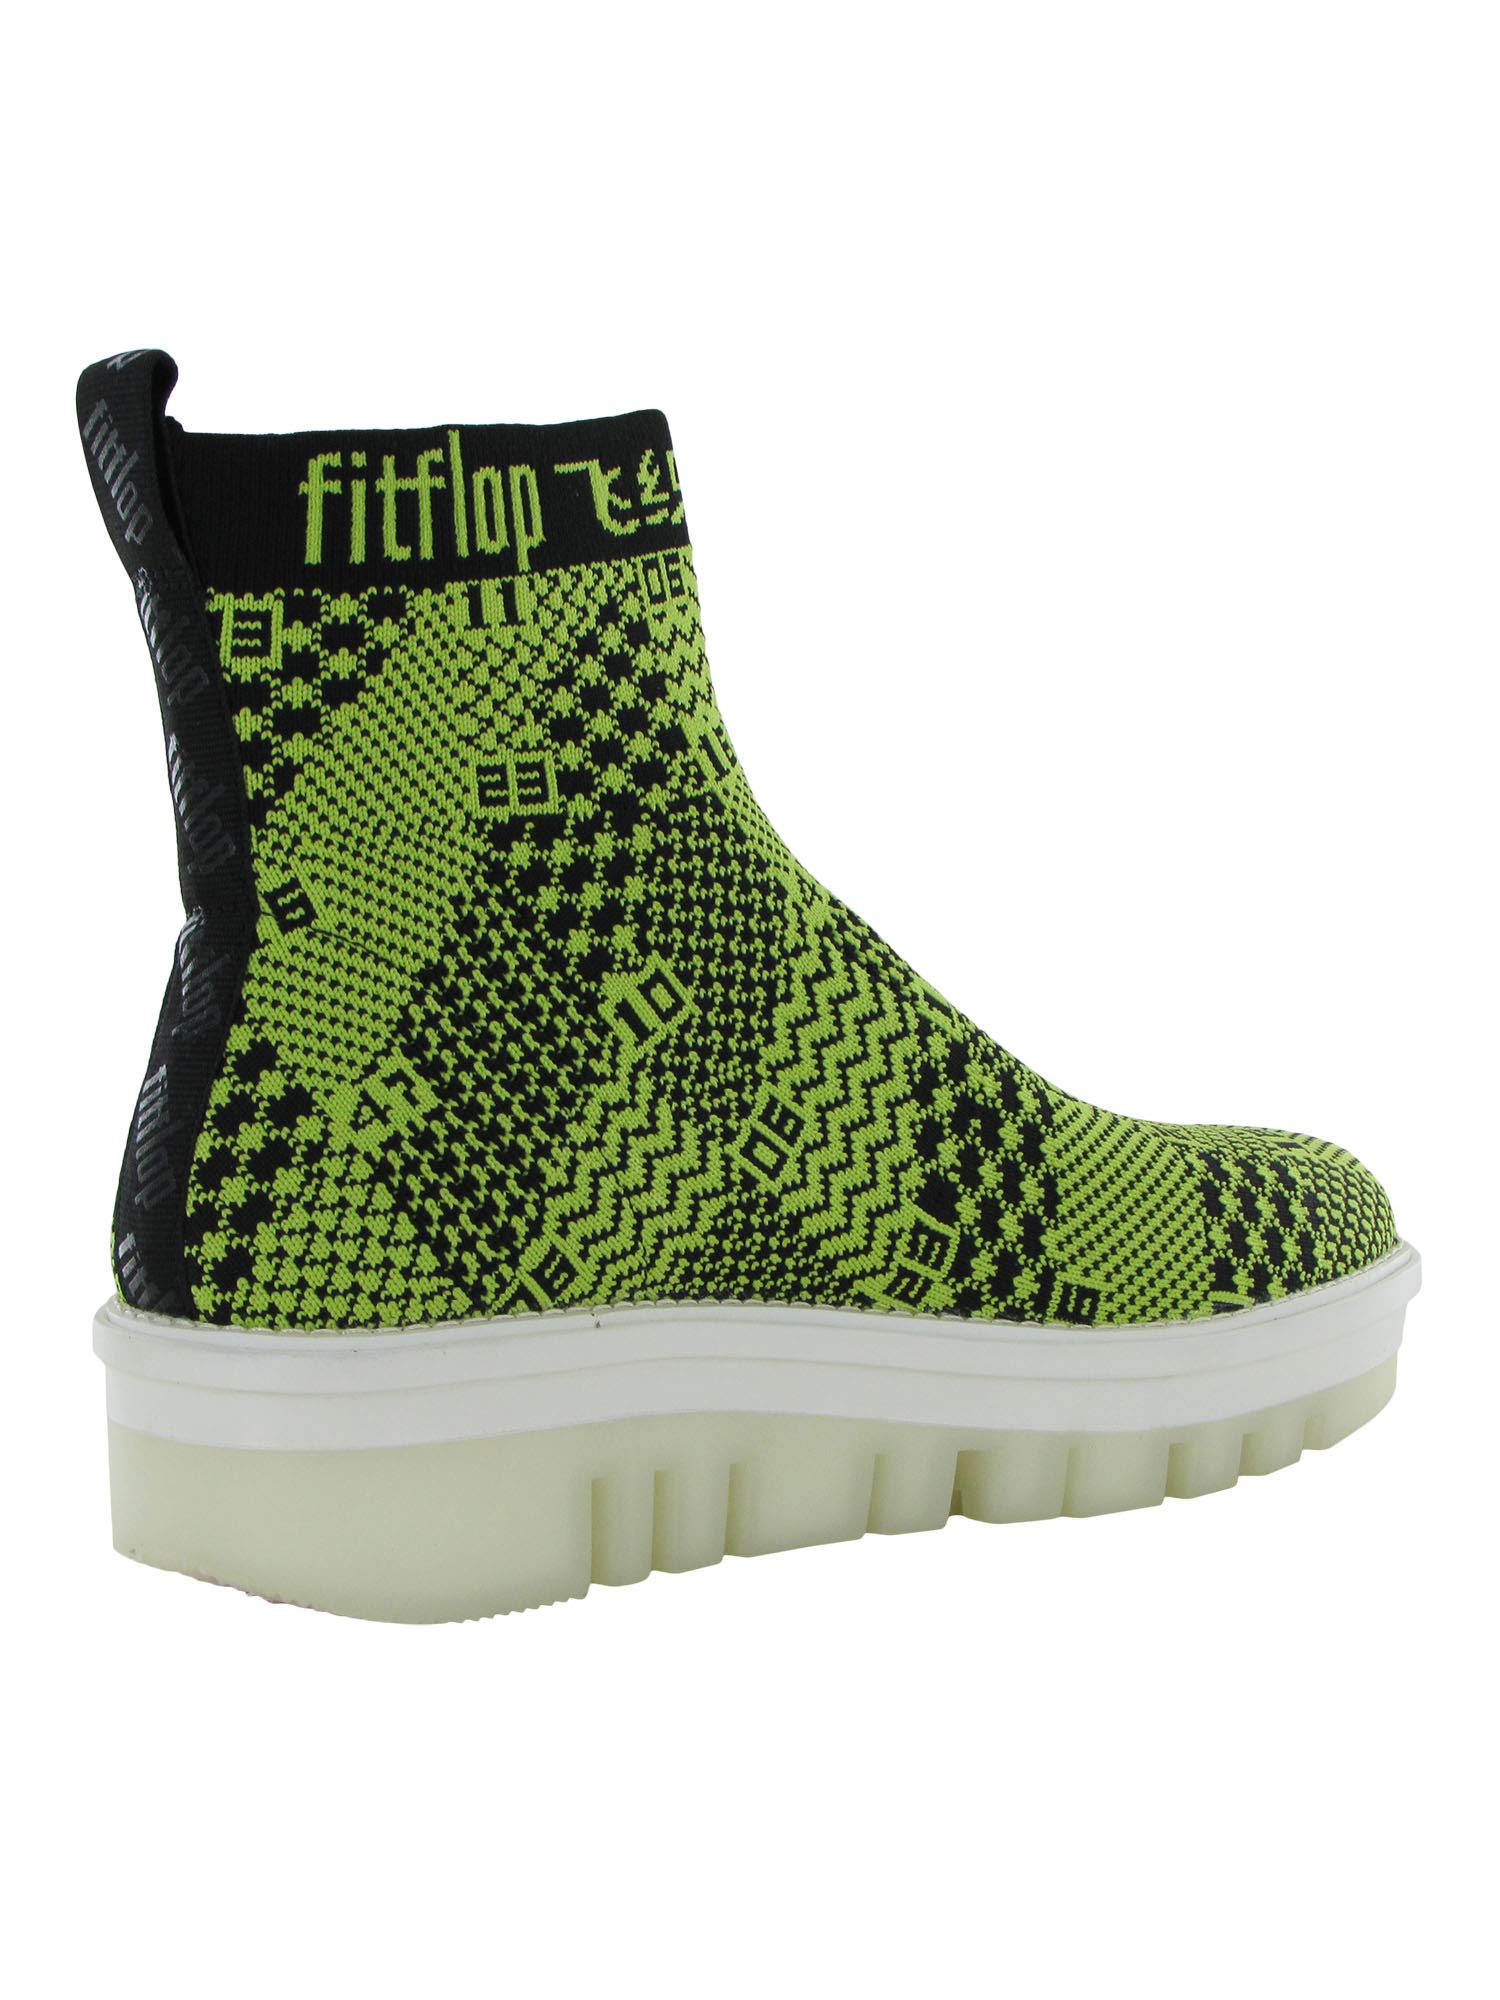 FitFlop Womens Swatchbook Sock Boot Shoes